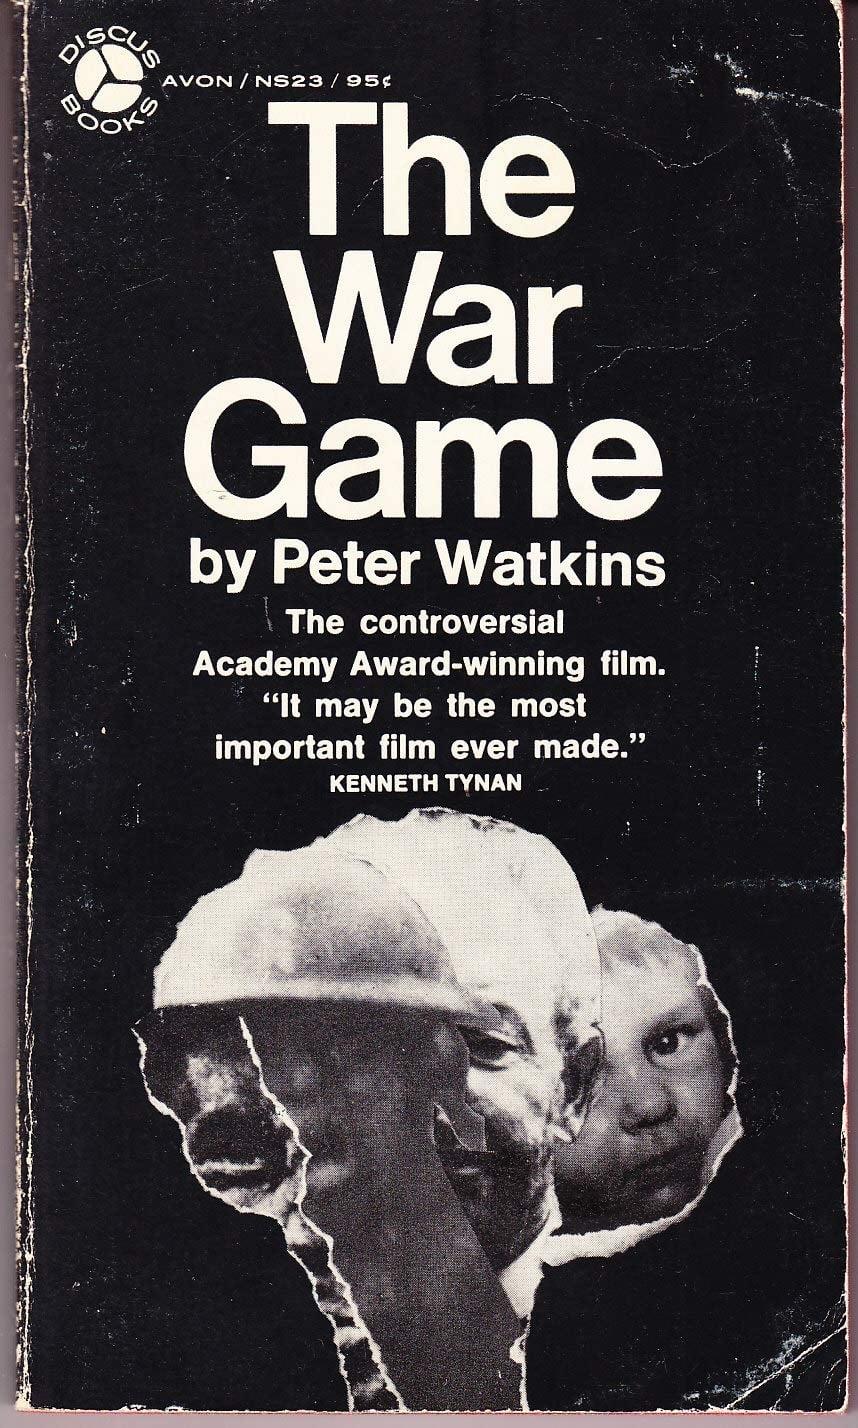 The War Game poster